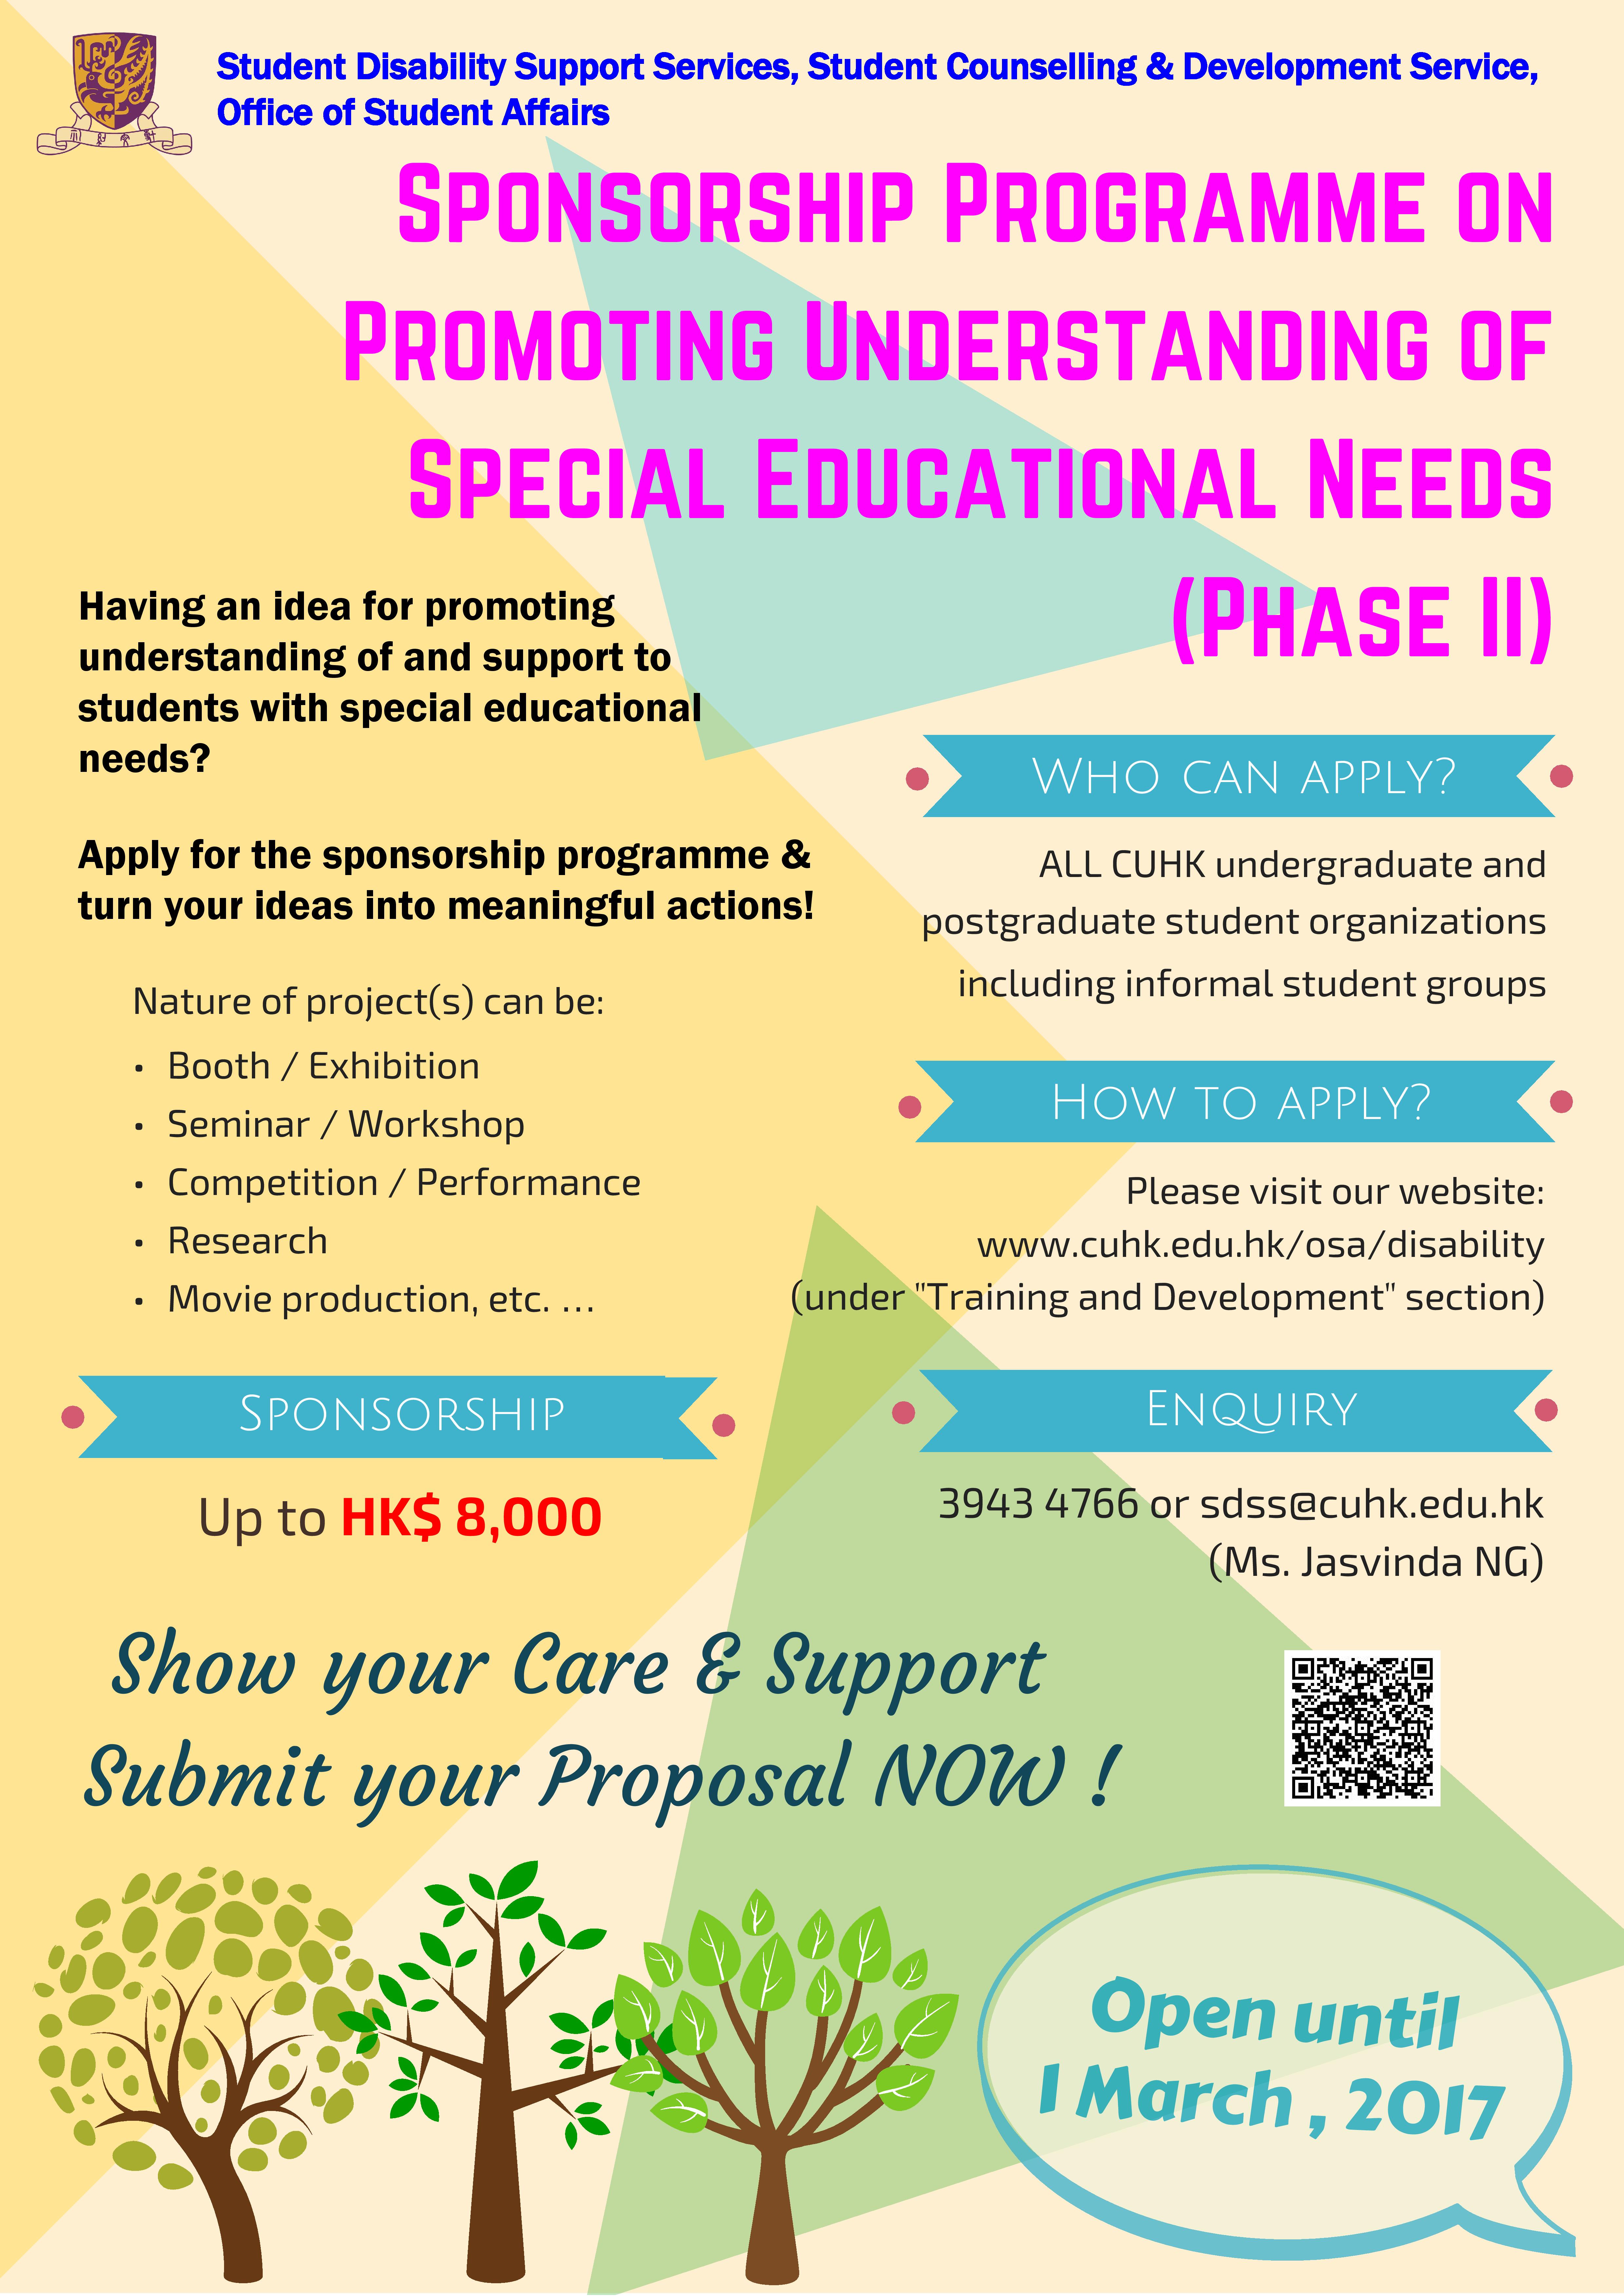 poster of sponsorship on promoting understanding of Special Educational Needs PhaseII